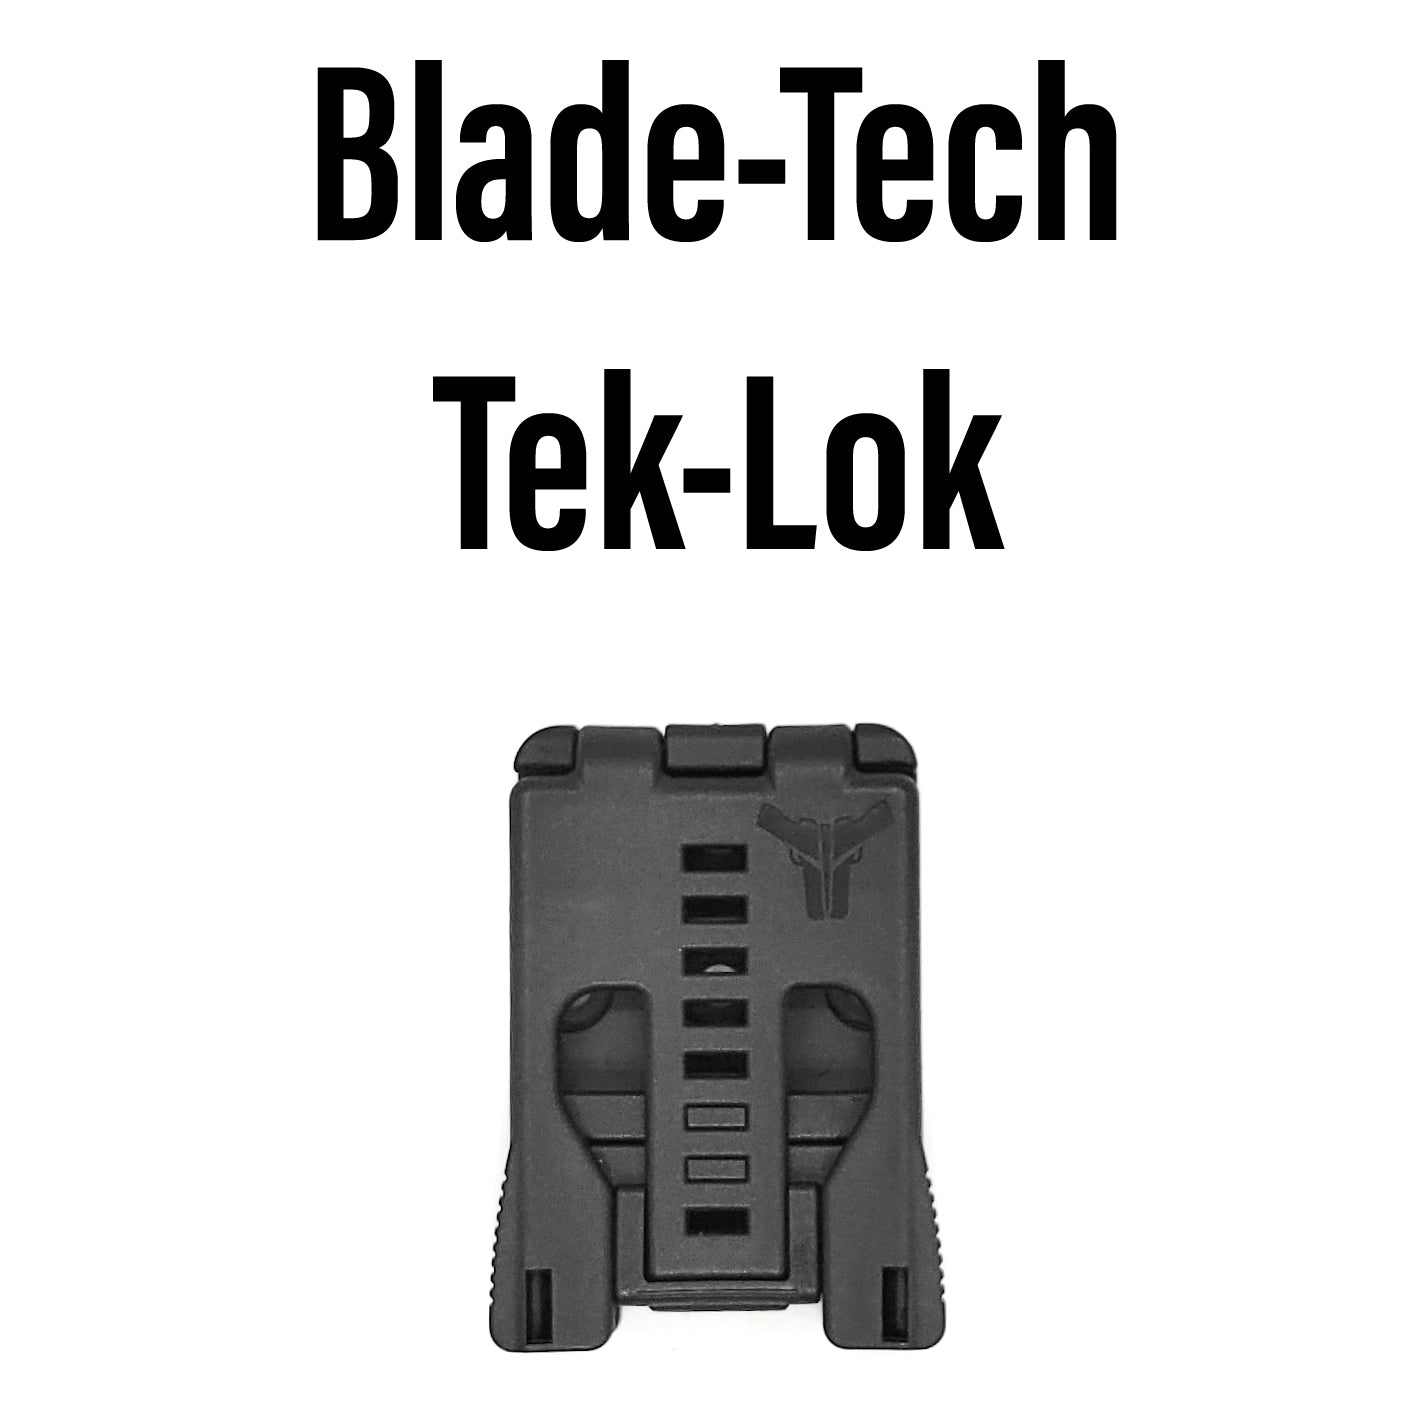 Best OWB Outside Kydex Magazine Pouch designed to fit double stack 10mm and 45 ACP pistol magazines from Sig Sauer, Glock, FN, Walther, Ruger, Smith & Wesson. Magazine retention is adjustable with the Magazine Retention Device and a 1/8" Allen wrench. The holster will allow bullets forward & bullets back orientation.